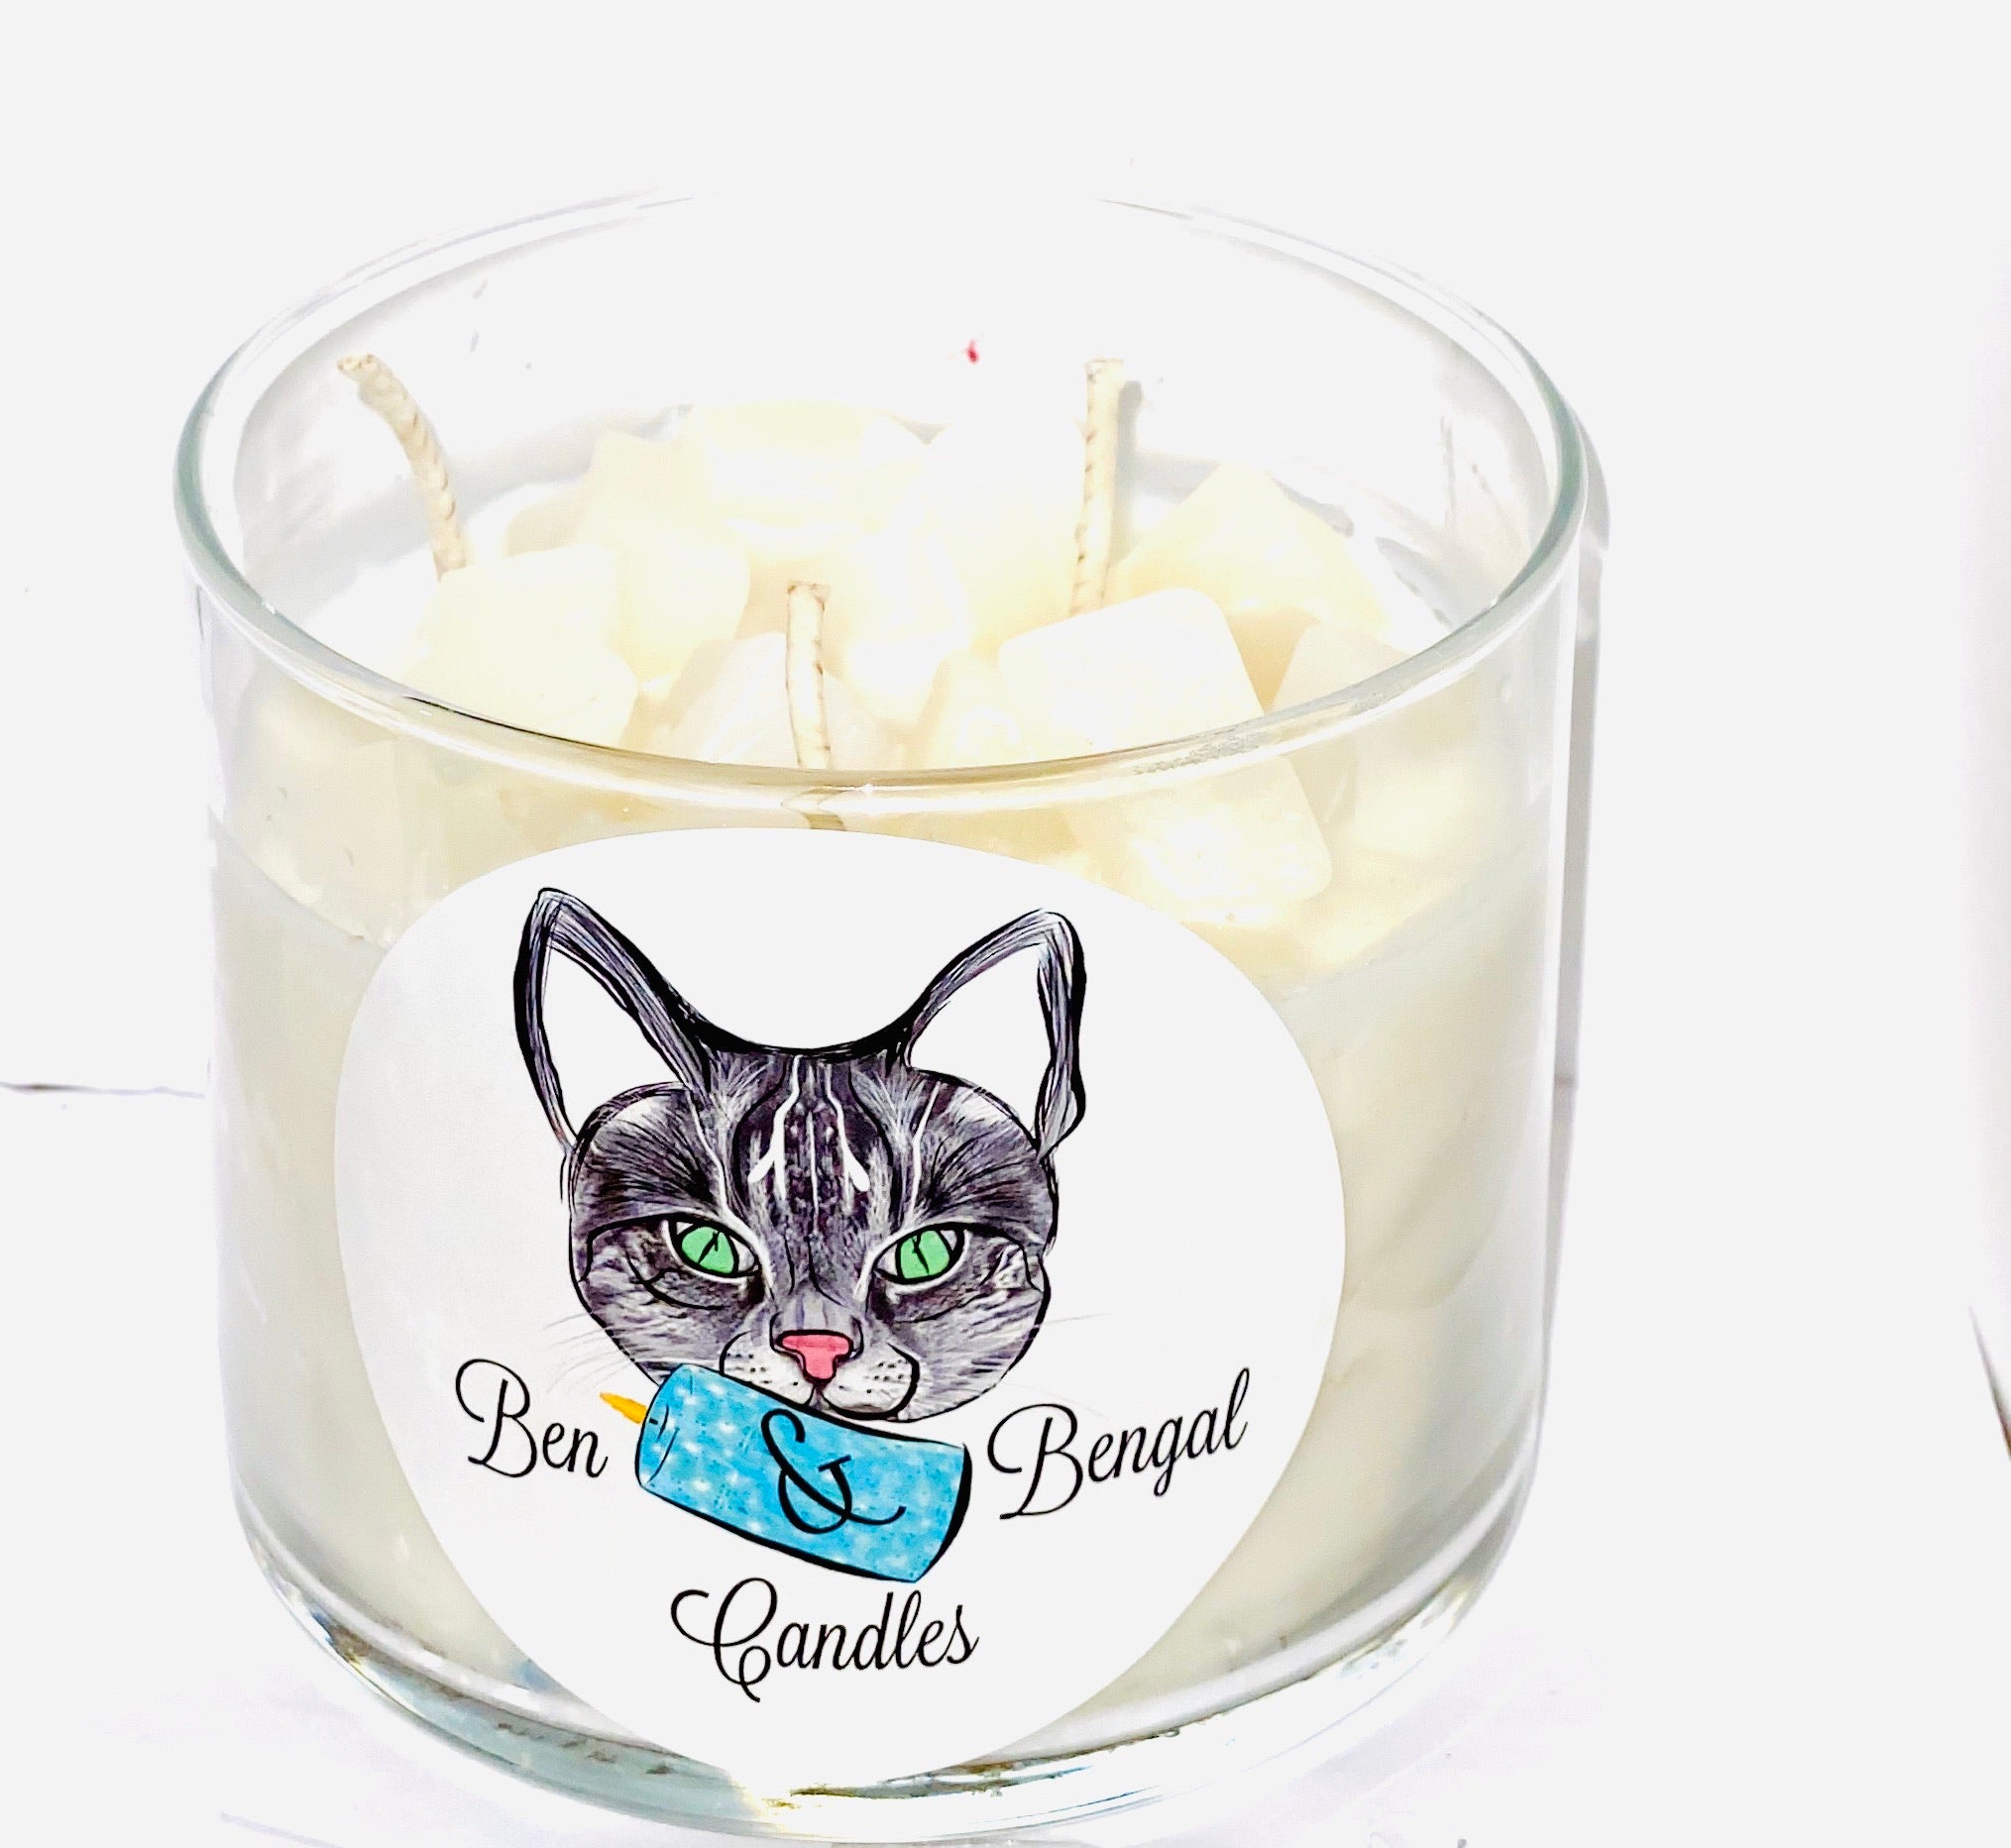 3-WICK CANDLES